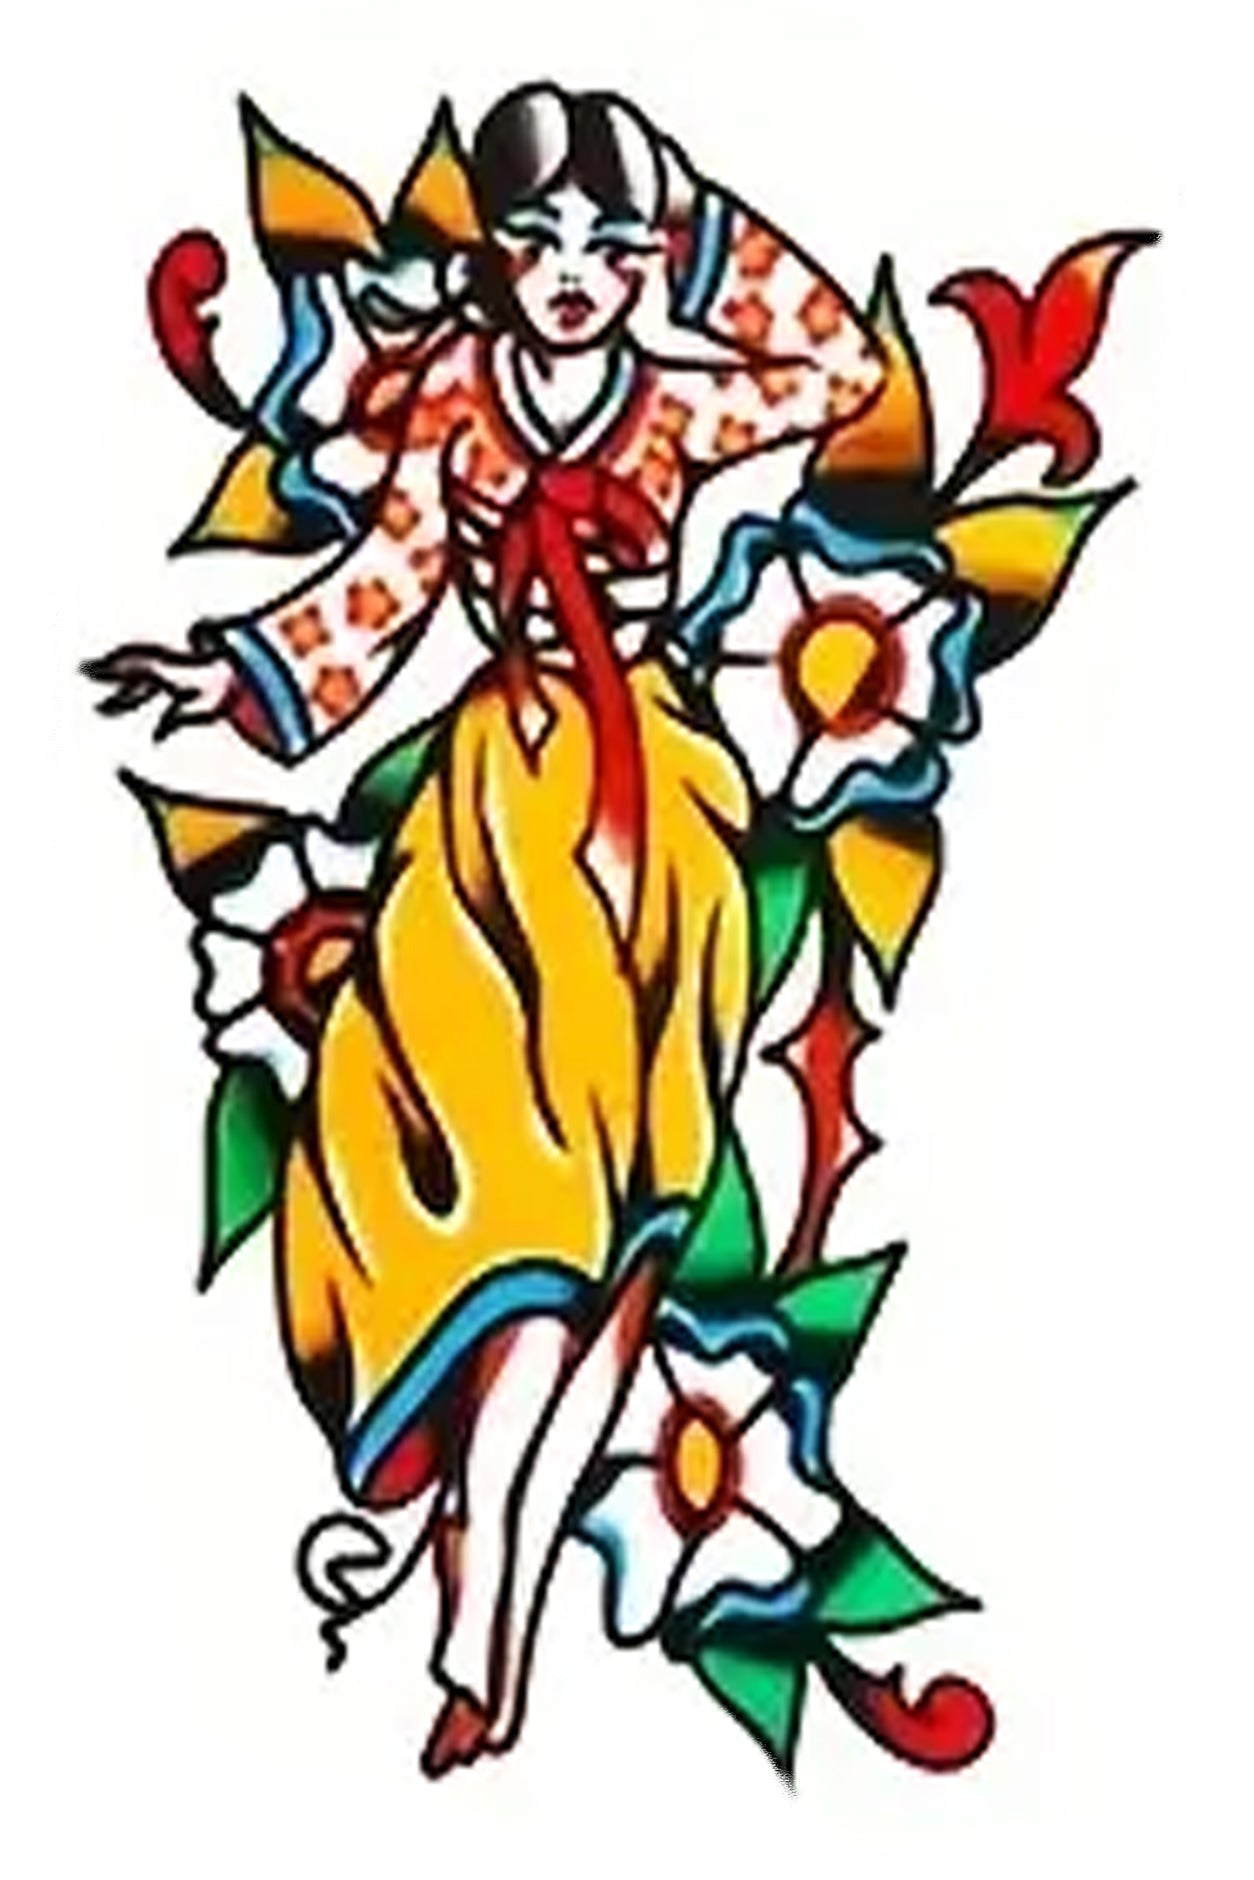 This artwork has a woman in an island dress from the early 1950s. There is a bouquet of flash art flowers from that time period behind her. The colors used in tattooing at the time were solid and heavy in red, gold, blue, and black inks. Many times, a sailor in port would get a tattoo of a woman to take with him on long adventures at sea.